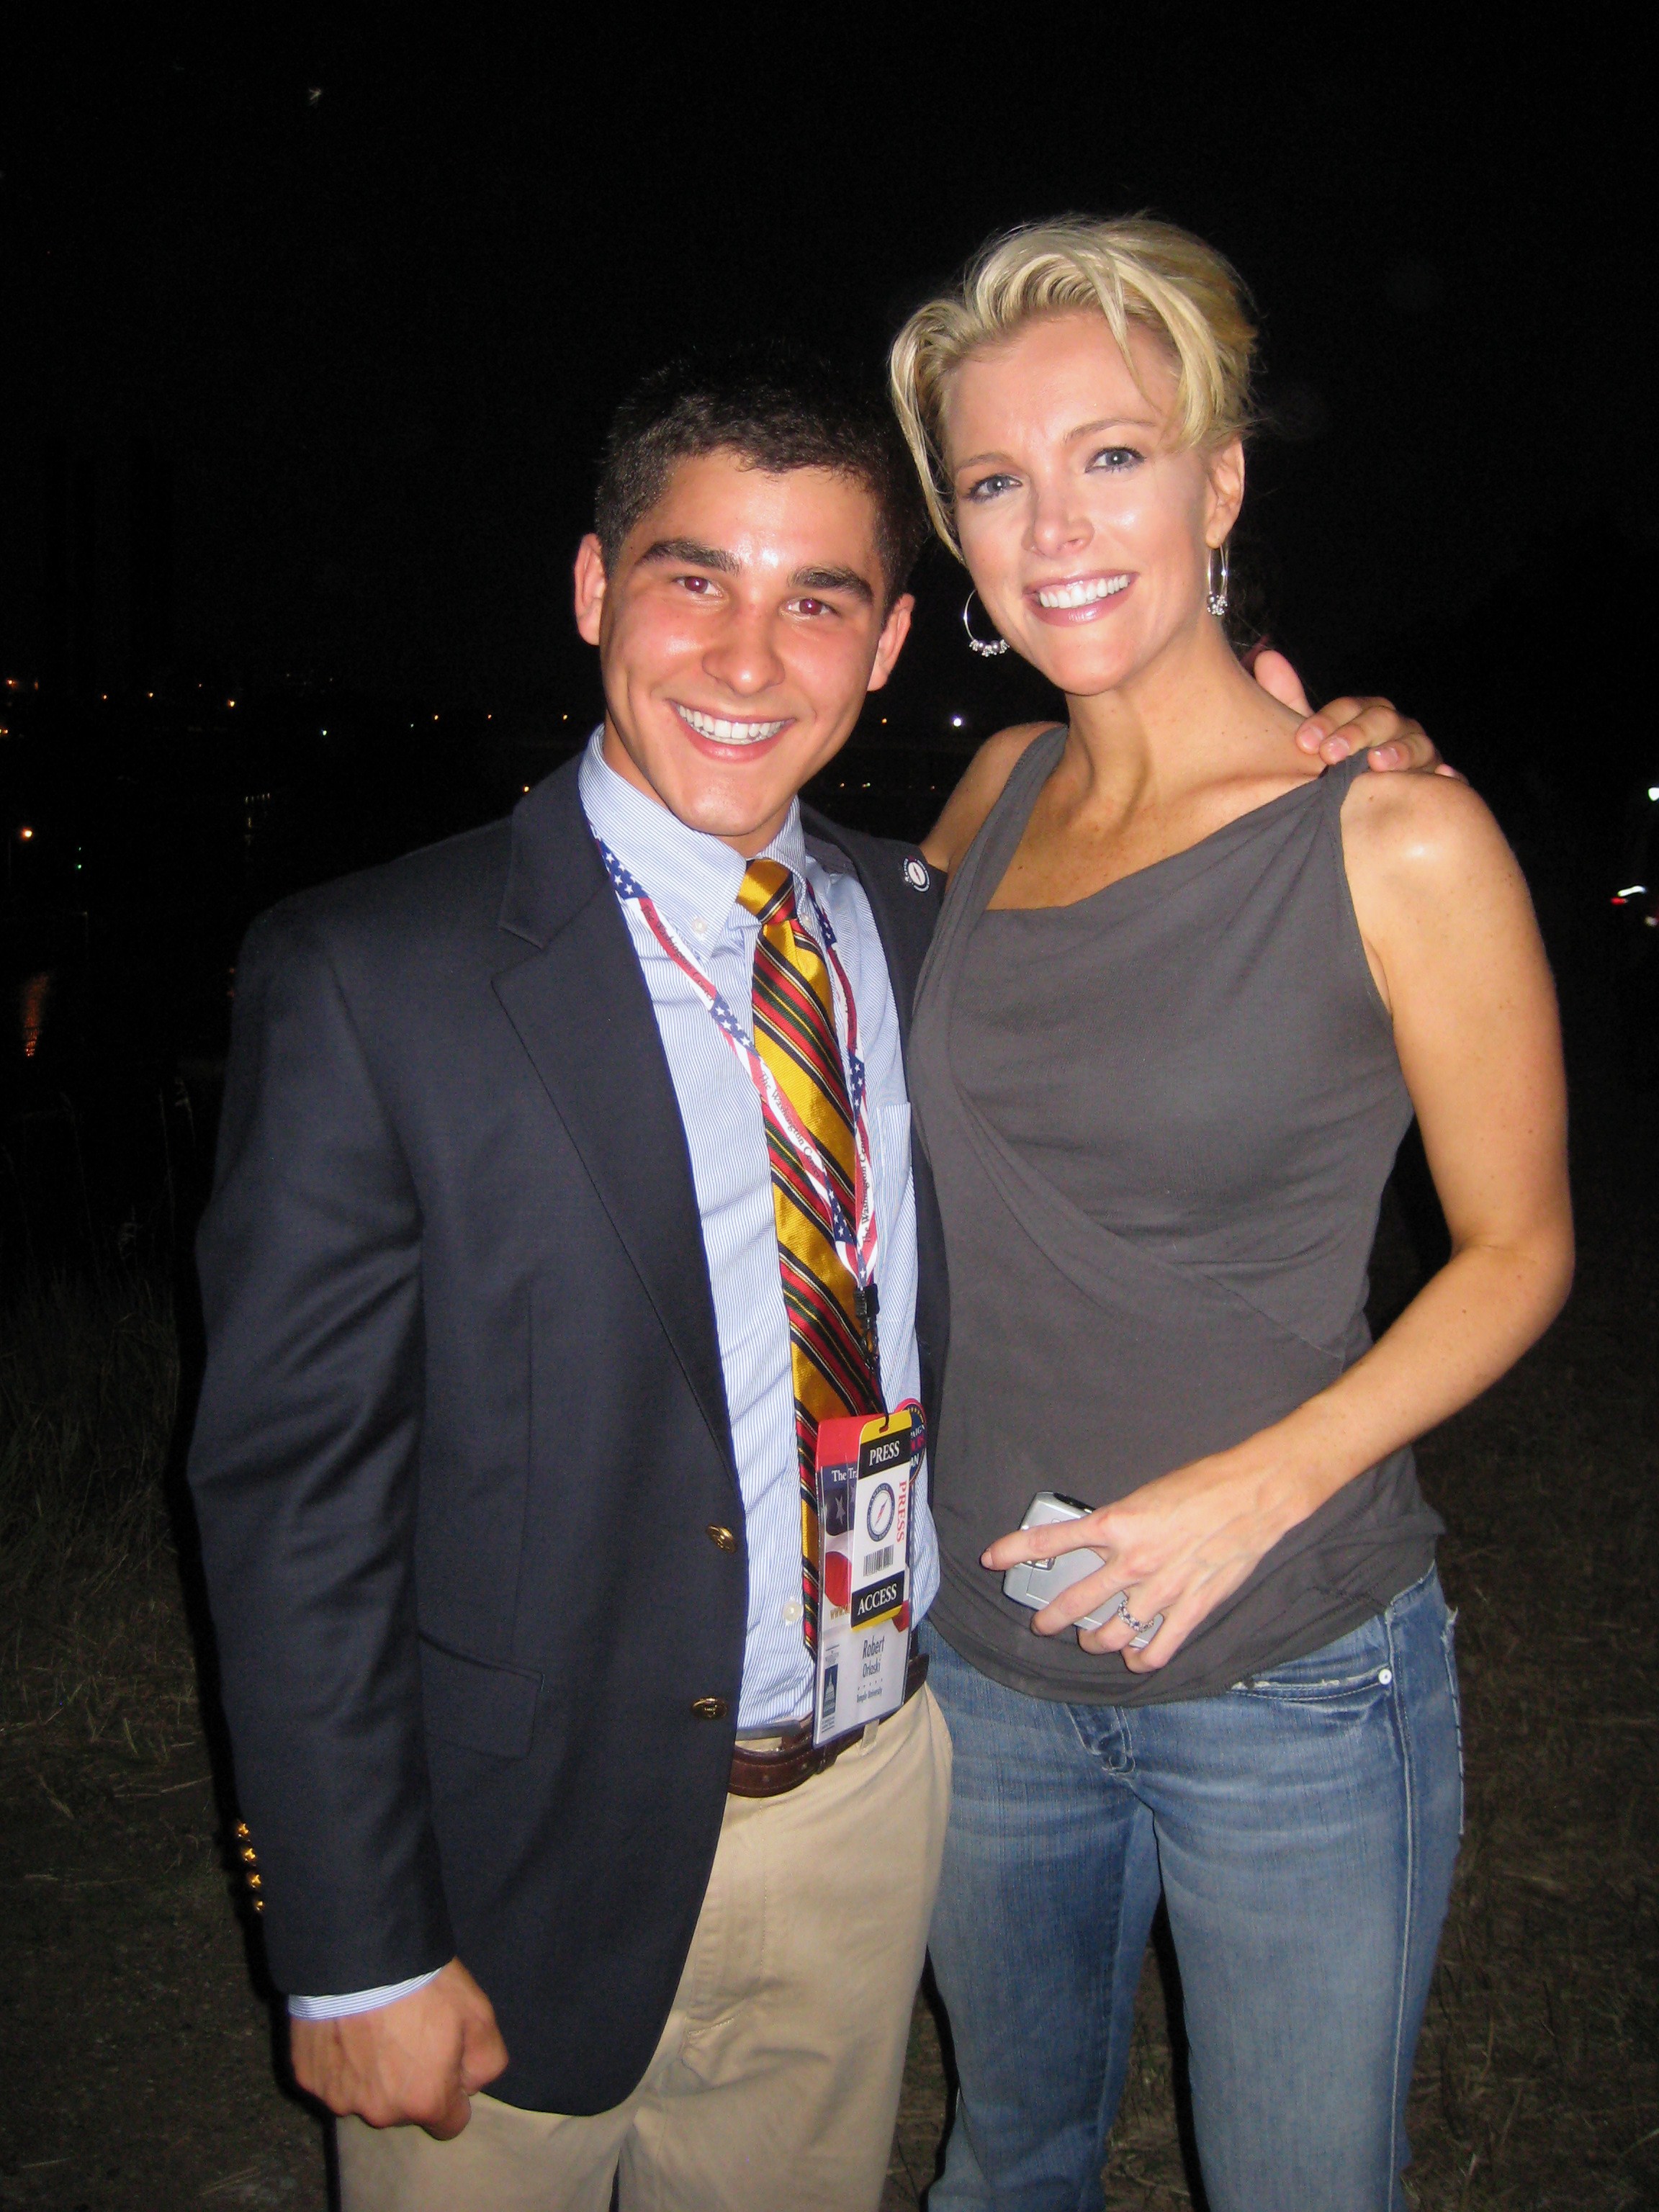 What are some jaw dropping pictures of Megyn Kelly? - Quora